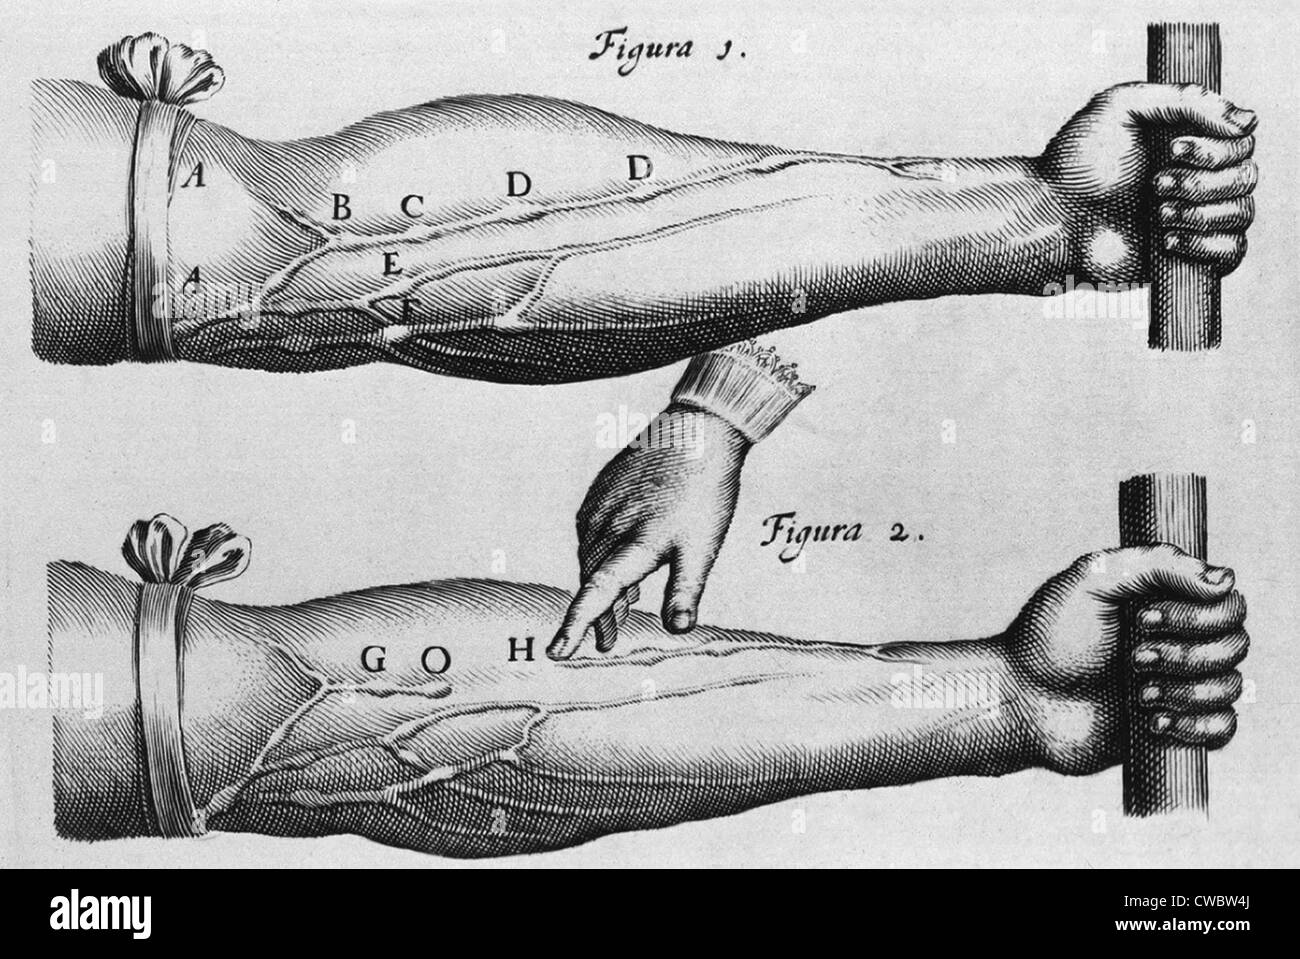 Circulation of the blood from William Harvey's ON THE MOTIONS OF THE HEART AND BLOOD, 1628. Illustrations of a tourniqueted Stock Photo